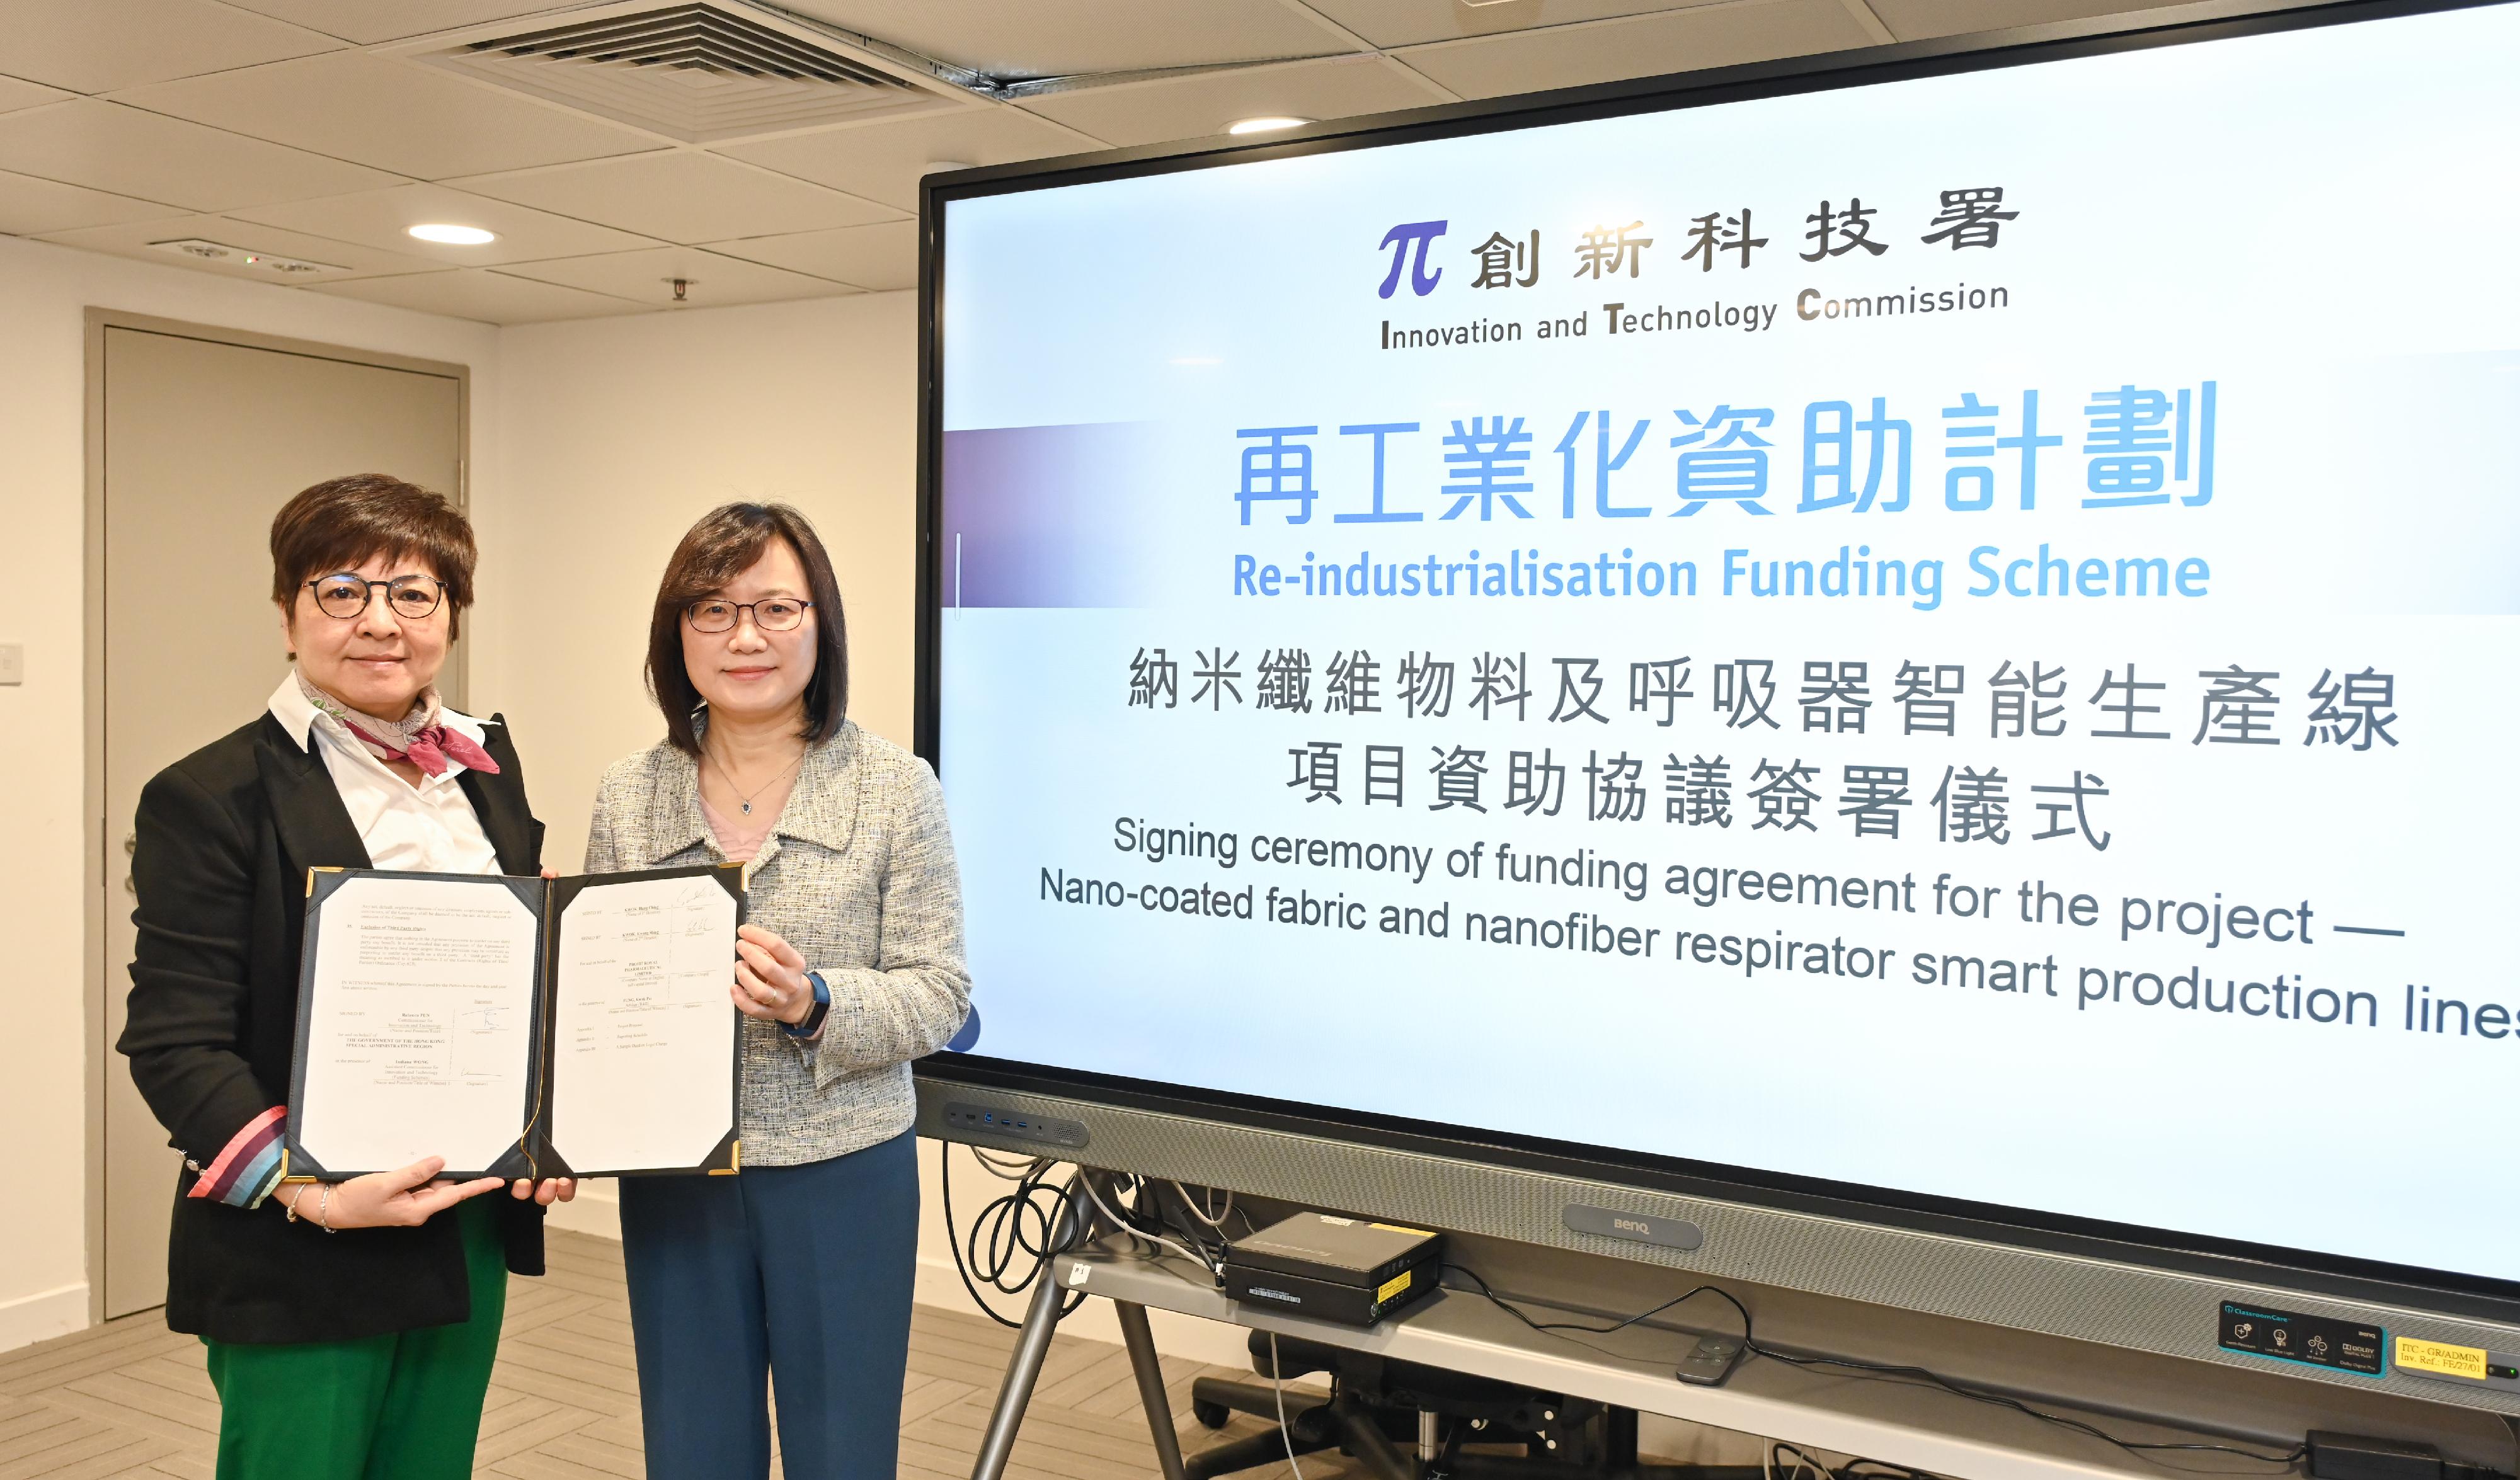 The Re-industrialisation Funding Scheme has approved funding for a project by Profit Royal Pharmaceutical Limited to set up smart production lines for nano-coated fabric and nanofiber respirator. Photo shows the Commissioner for Innovation and Technology, Ms Rebecca Pun (right), and the Chief Executive Officer of Profit Royal Pharmaceutical Limited, Ms Kwok Hang-ching (left), attending the signing ceremony of the funding agreement today (March 14).